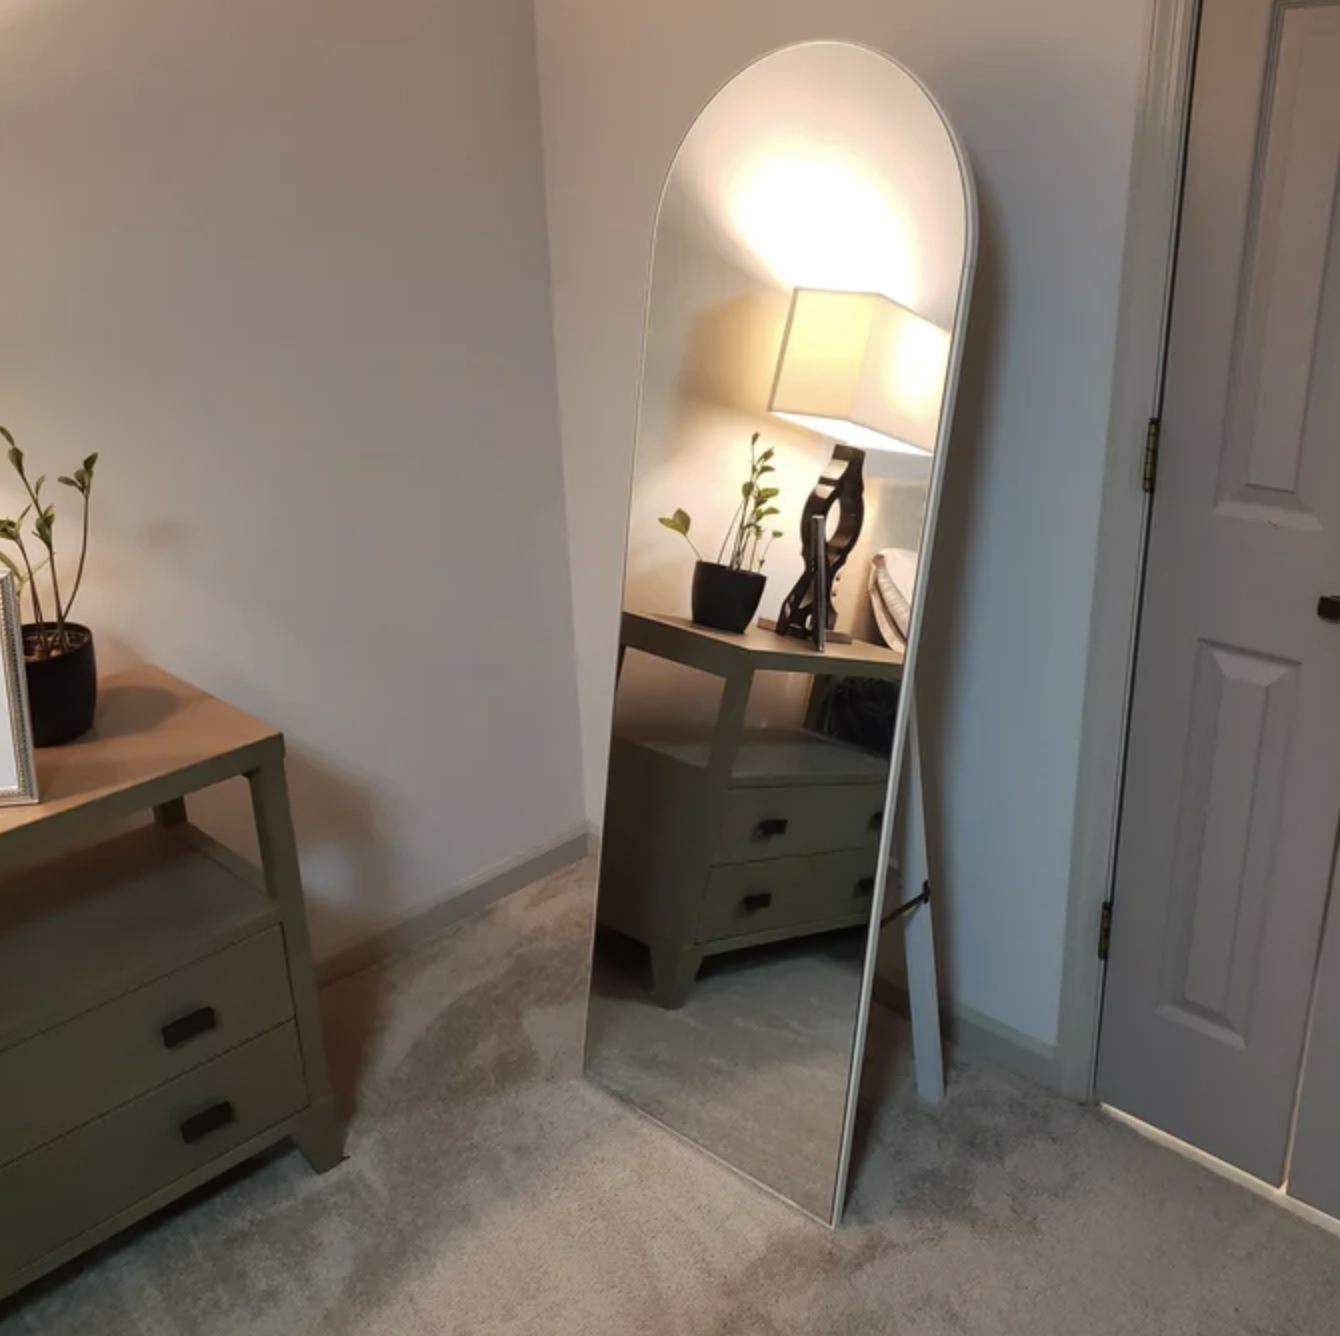 The mirror leaning in a bedroom